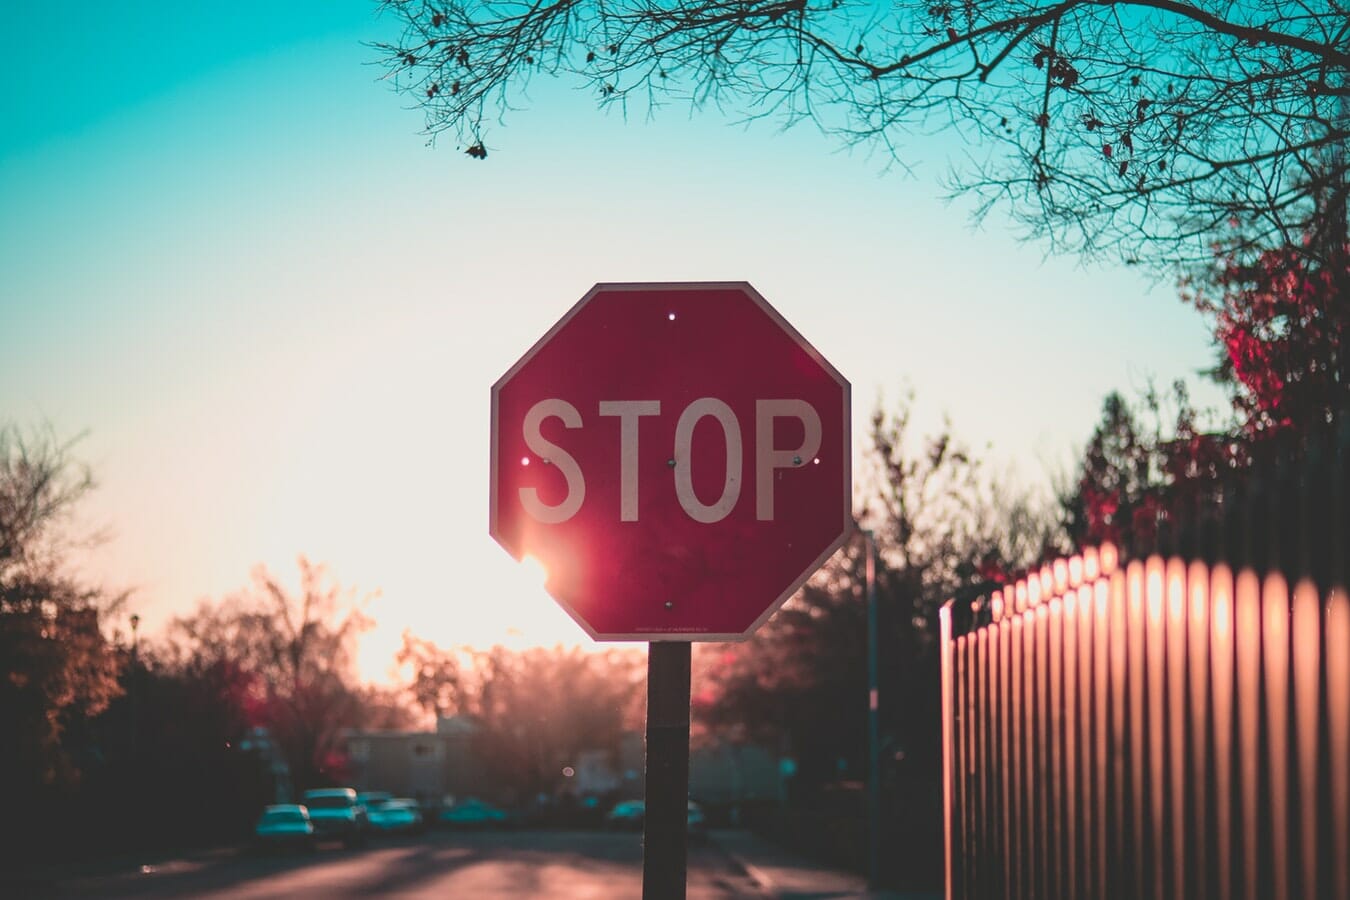 A stop sign in the middle of a street.